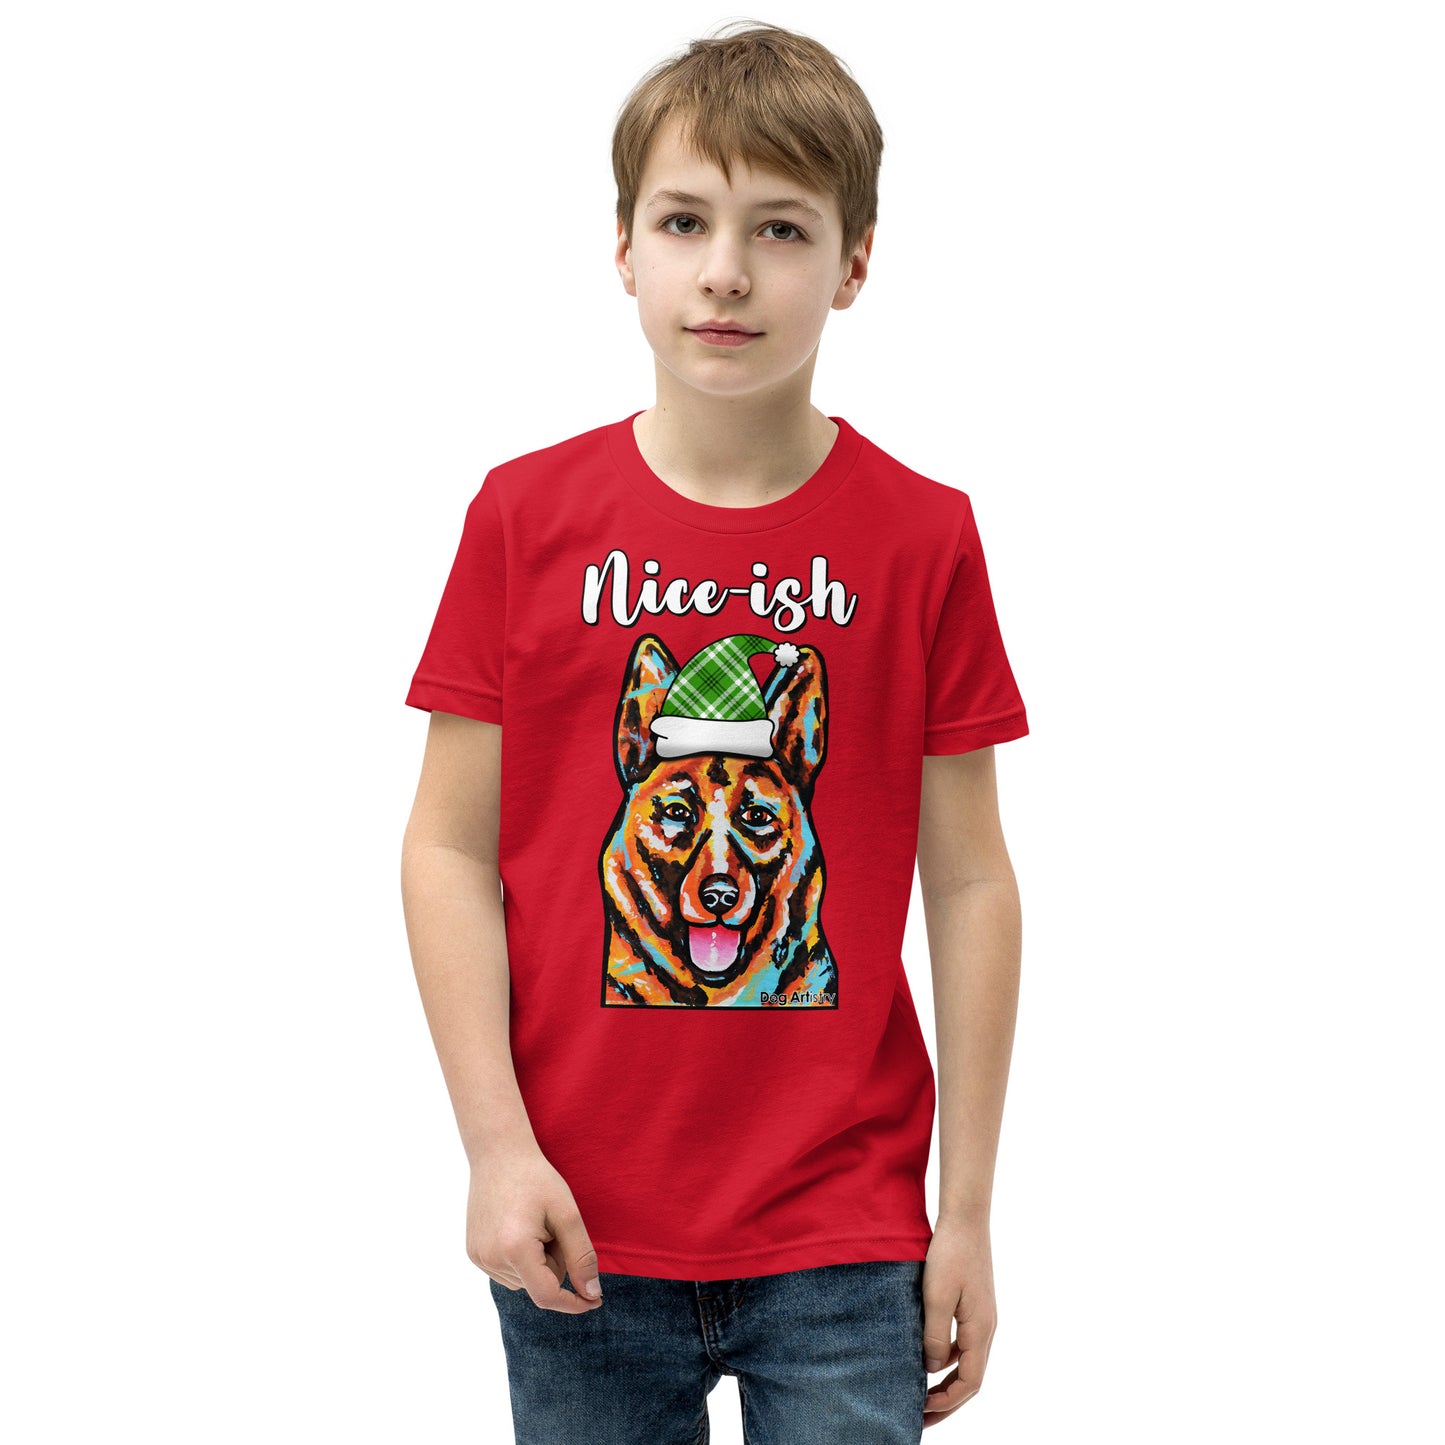 Nice-Ish German Shepherd Holiday youth t-shirt red by Dog Artistry.